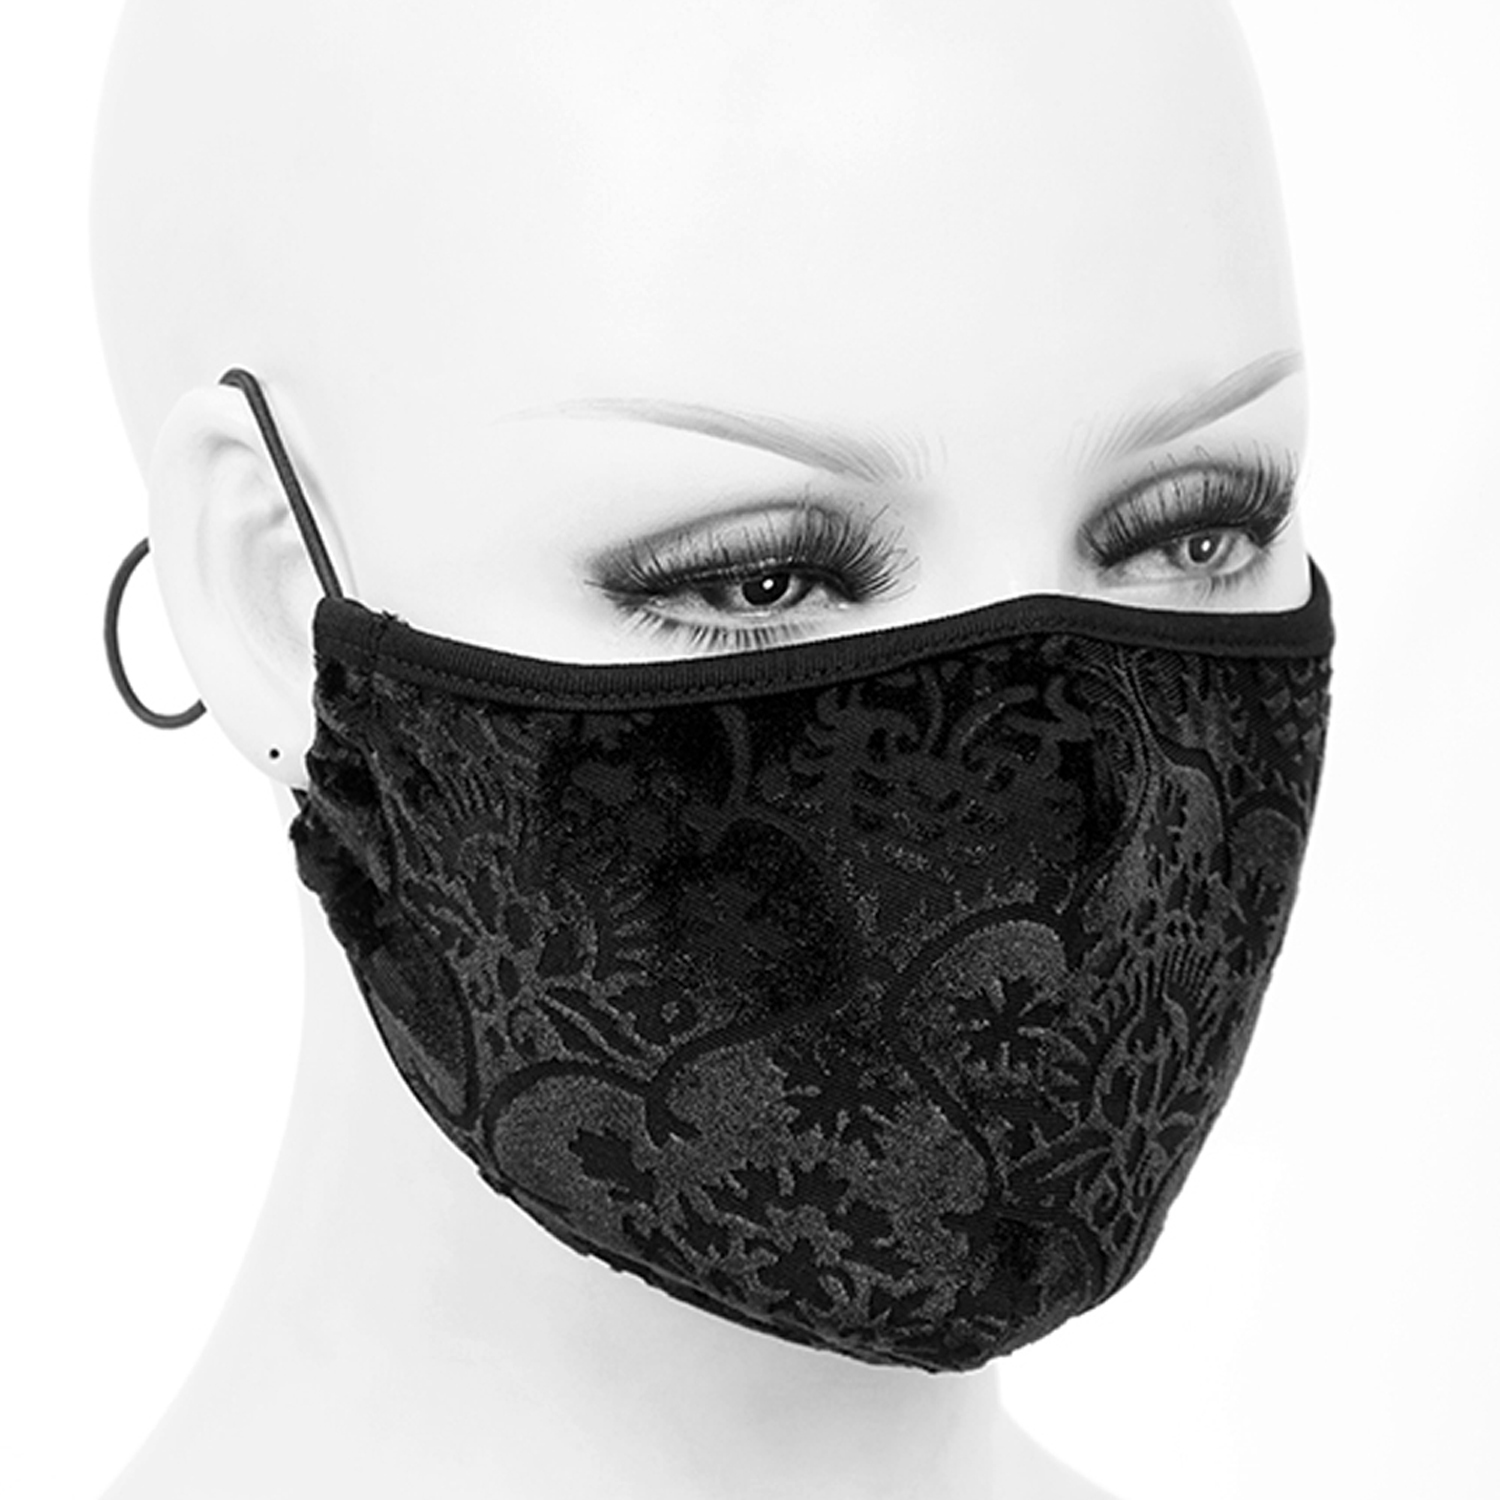 Details about   Pocket Mask With All The Certifications Surg Grade 